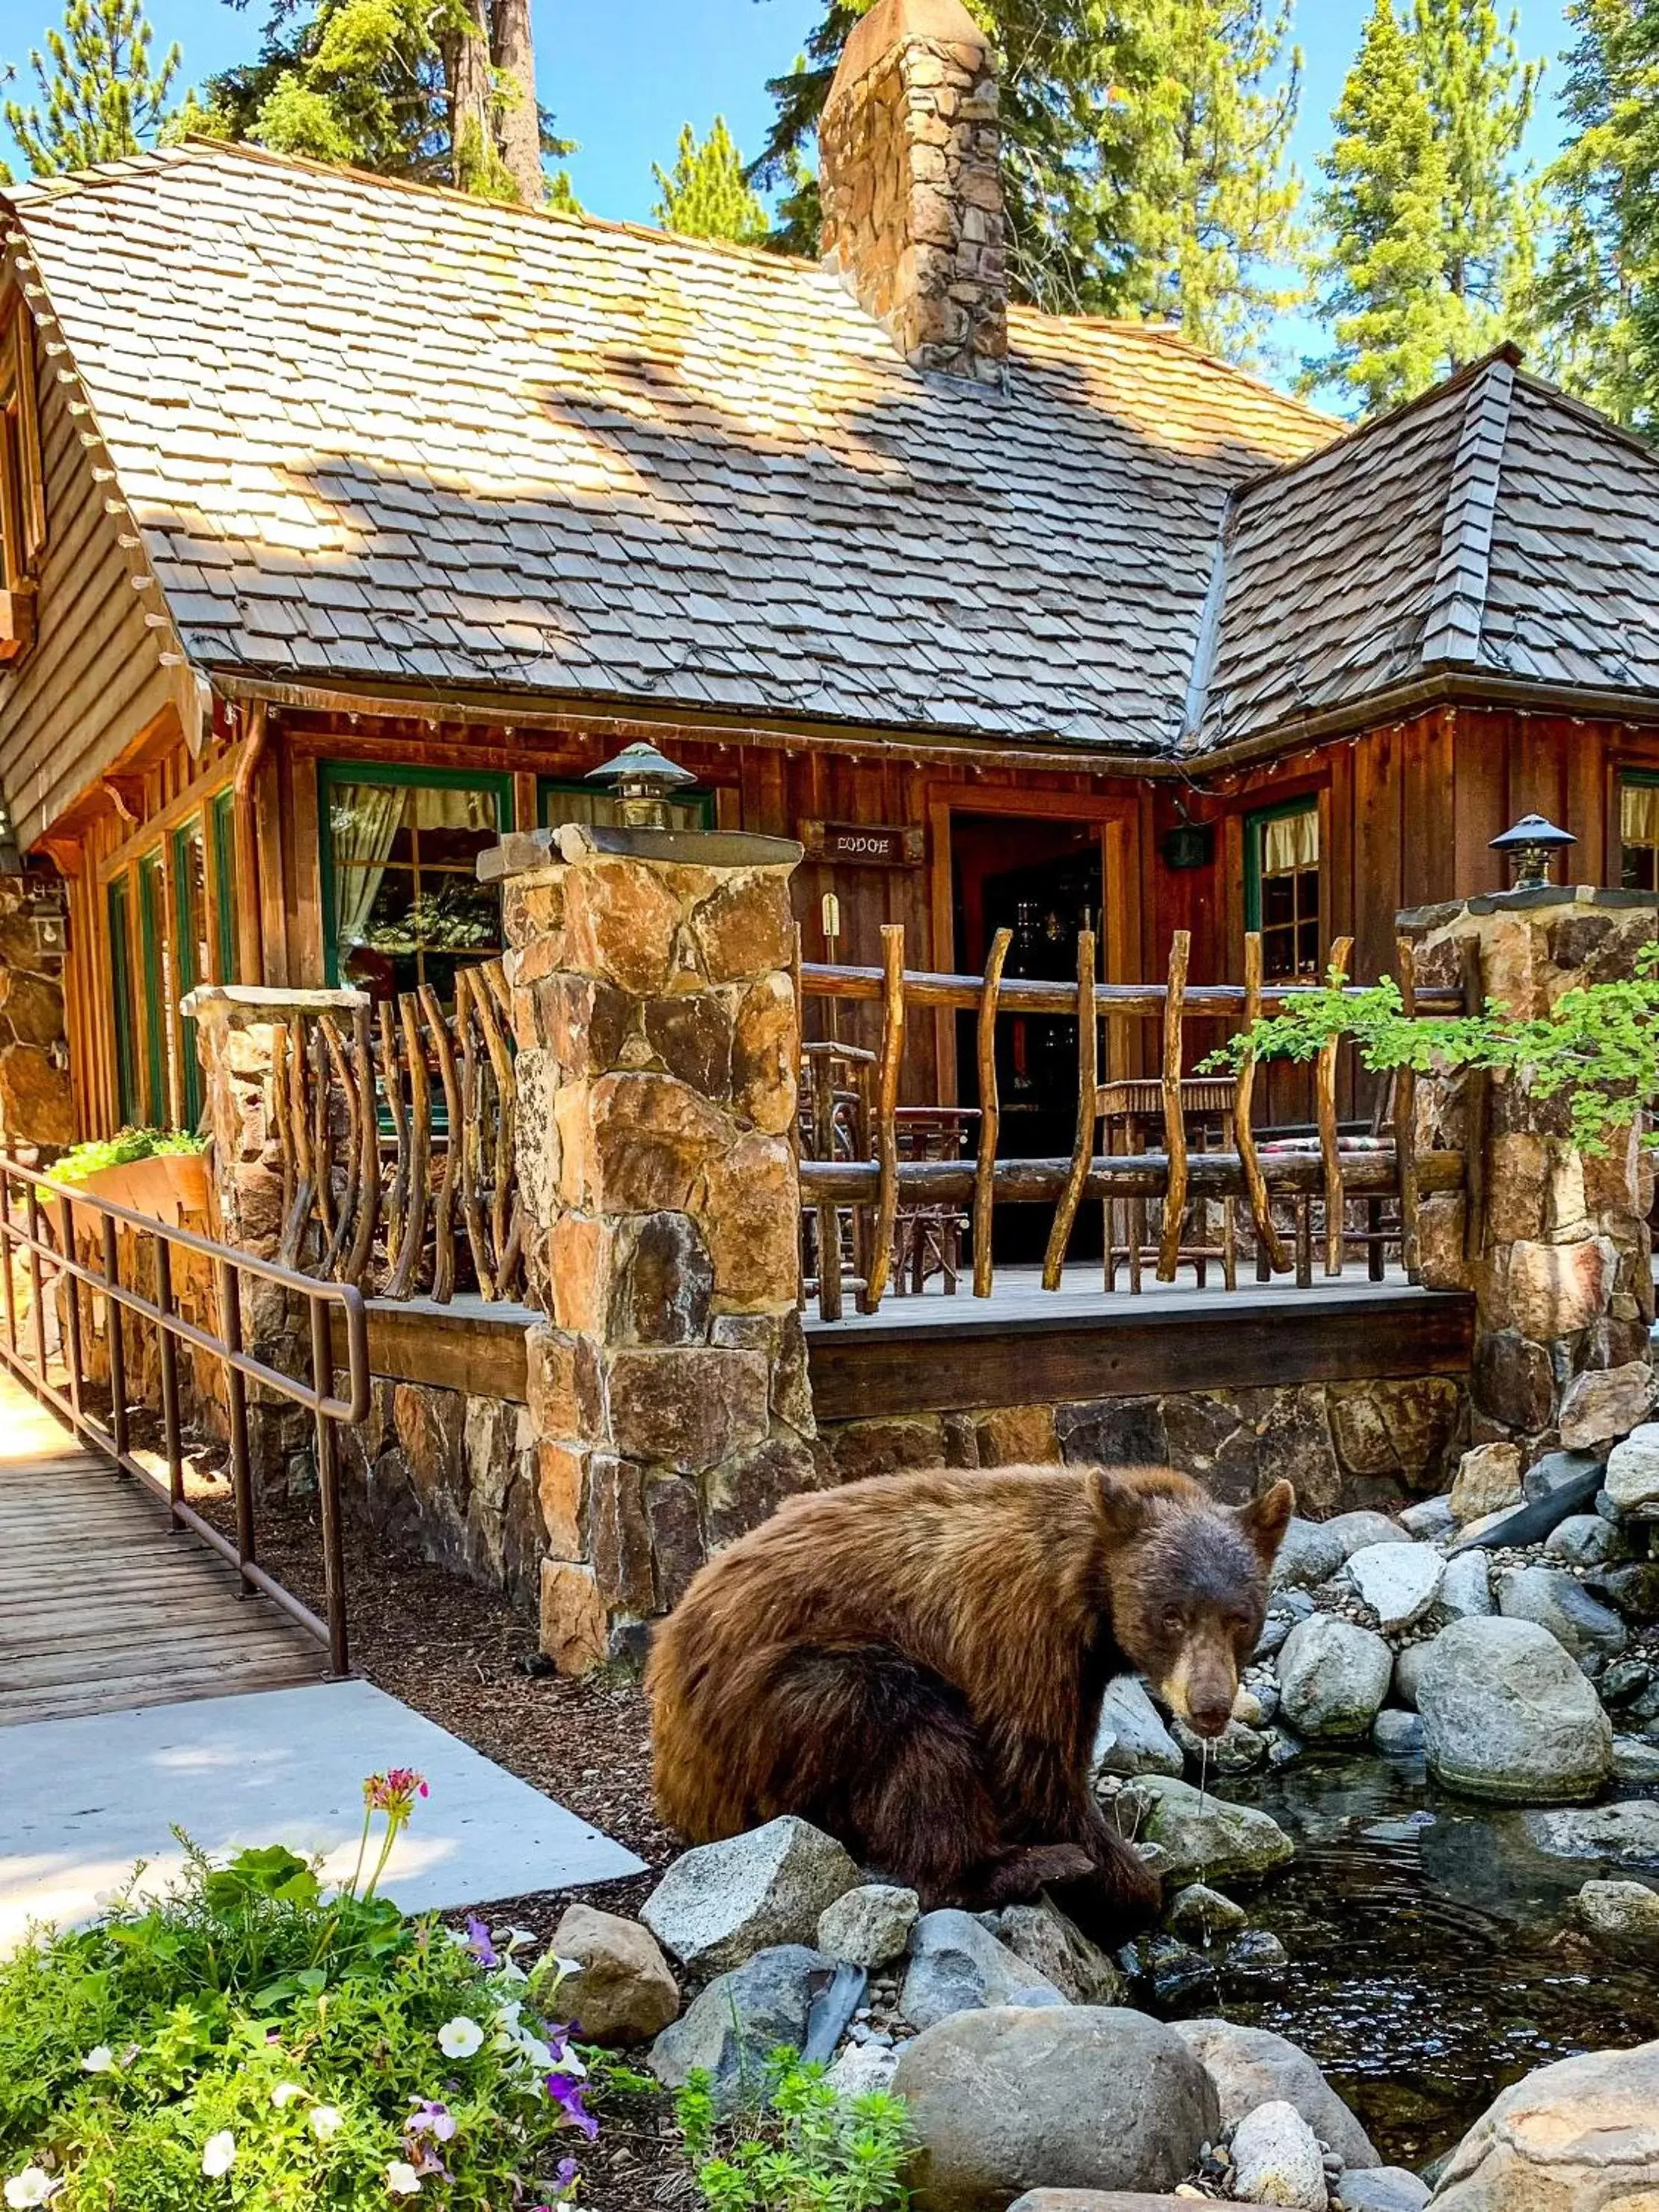 Property building, Other Animals in Cottage Inn At Lake Tahoe